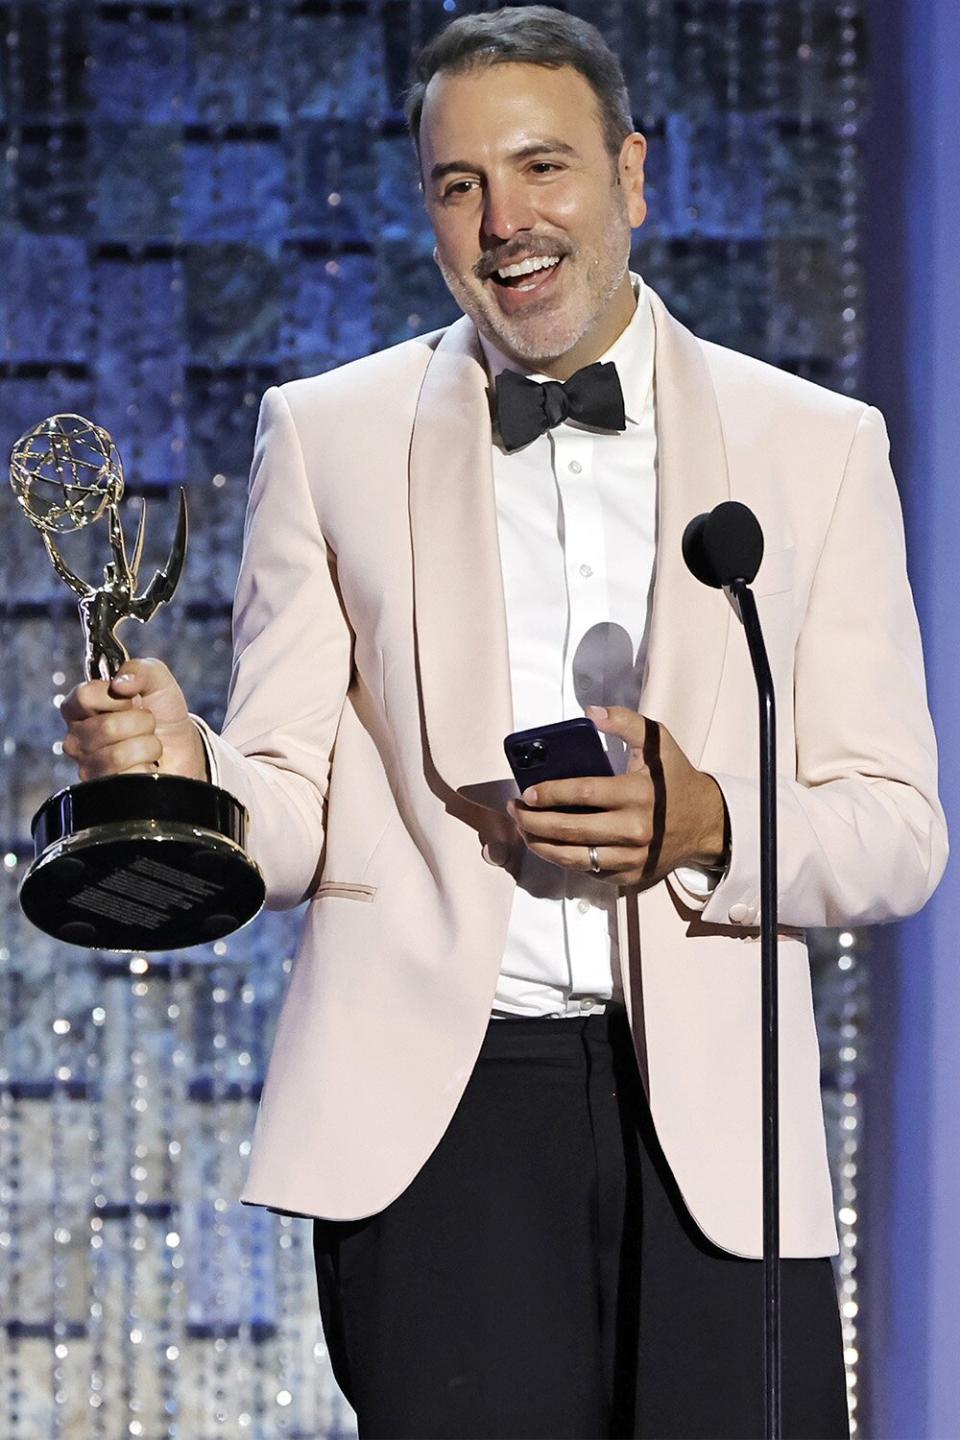 PASADENA, CALIFORNIA - JUNE 24: Ron Carlivati accepts the Outstanding Writing Team for a Drama Series award onstage during the 49th Daytime Emmy Awards at Pasadena Convention Center on June 24, 2022 in Pasadena, California. (Photo by Kevin Winter/Getty Images)